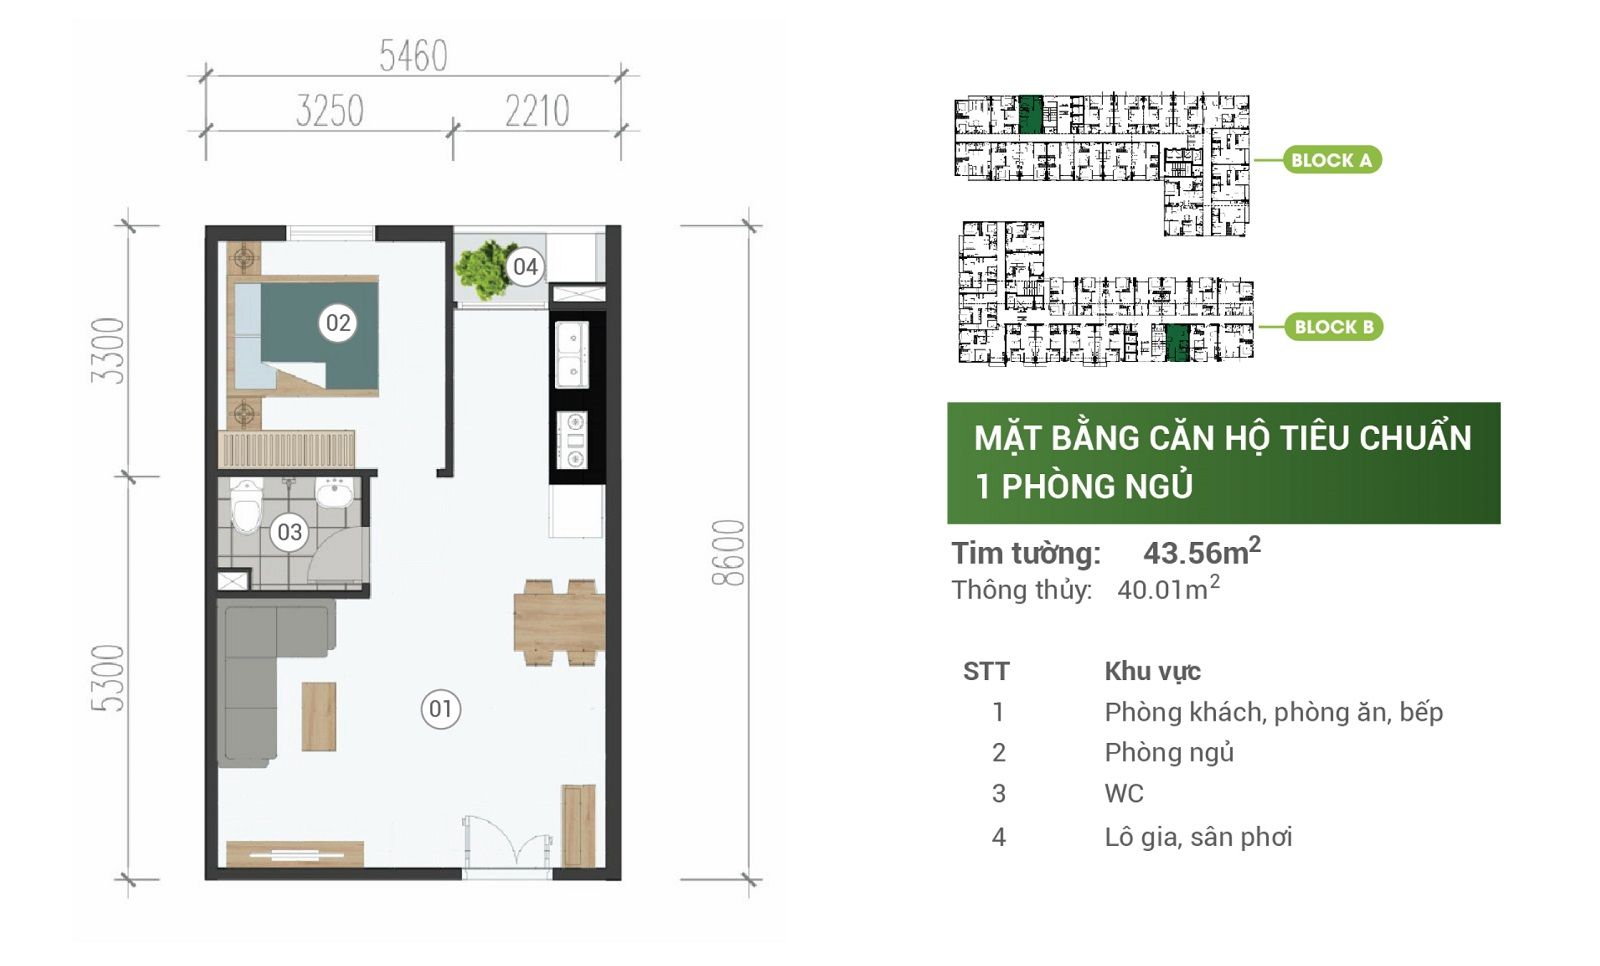 Layout Park View 1 bedroom apartment in Binh Duong